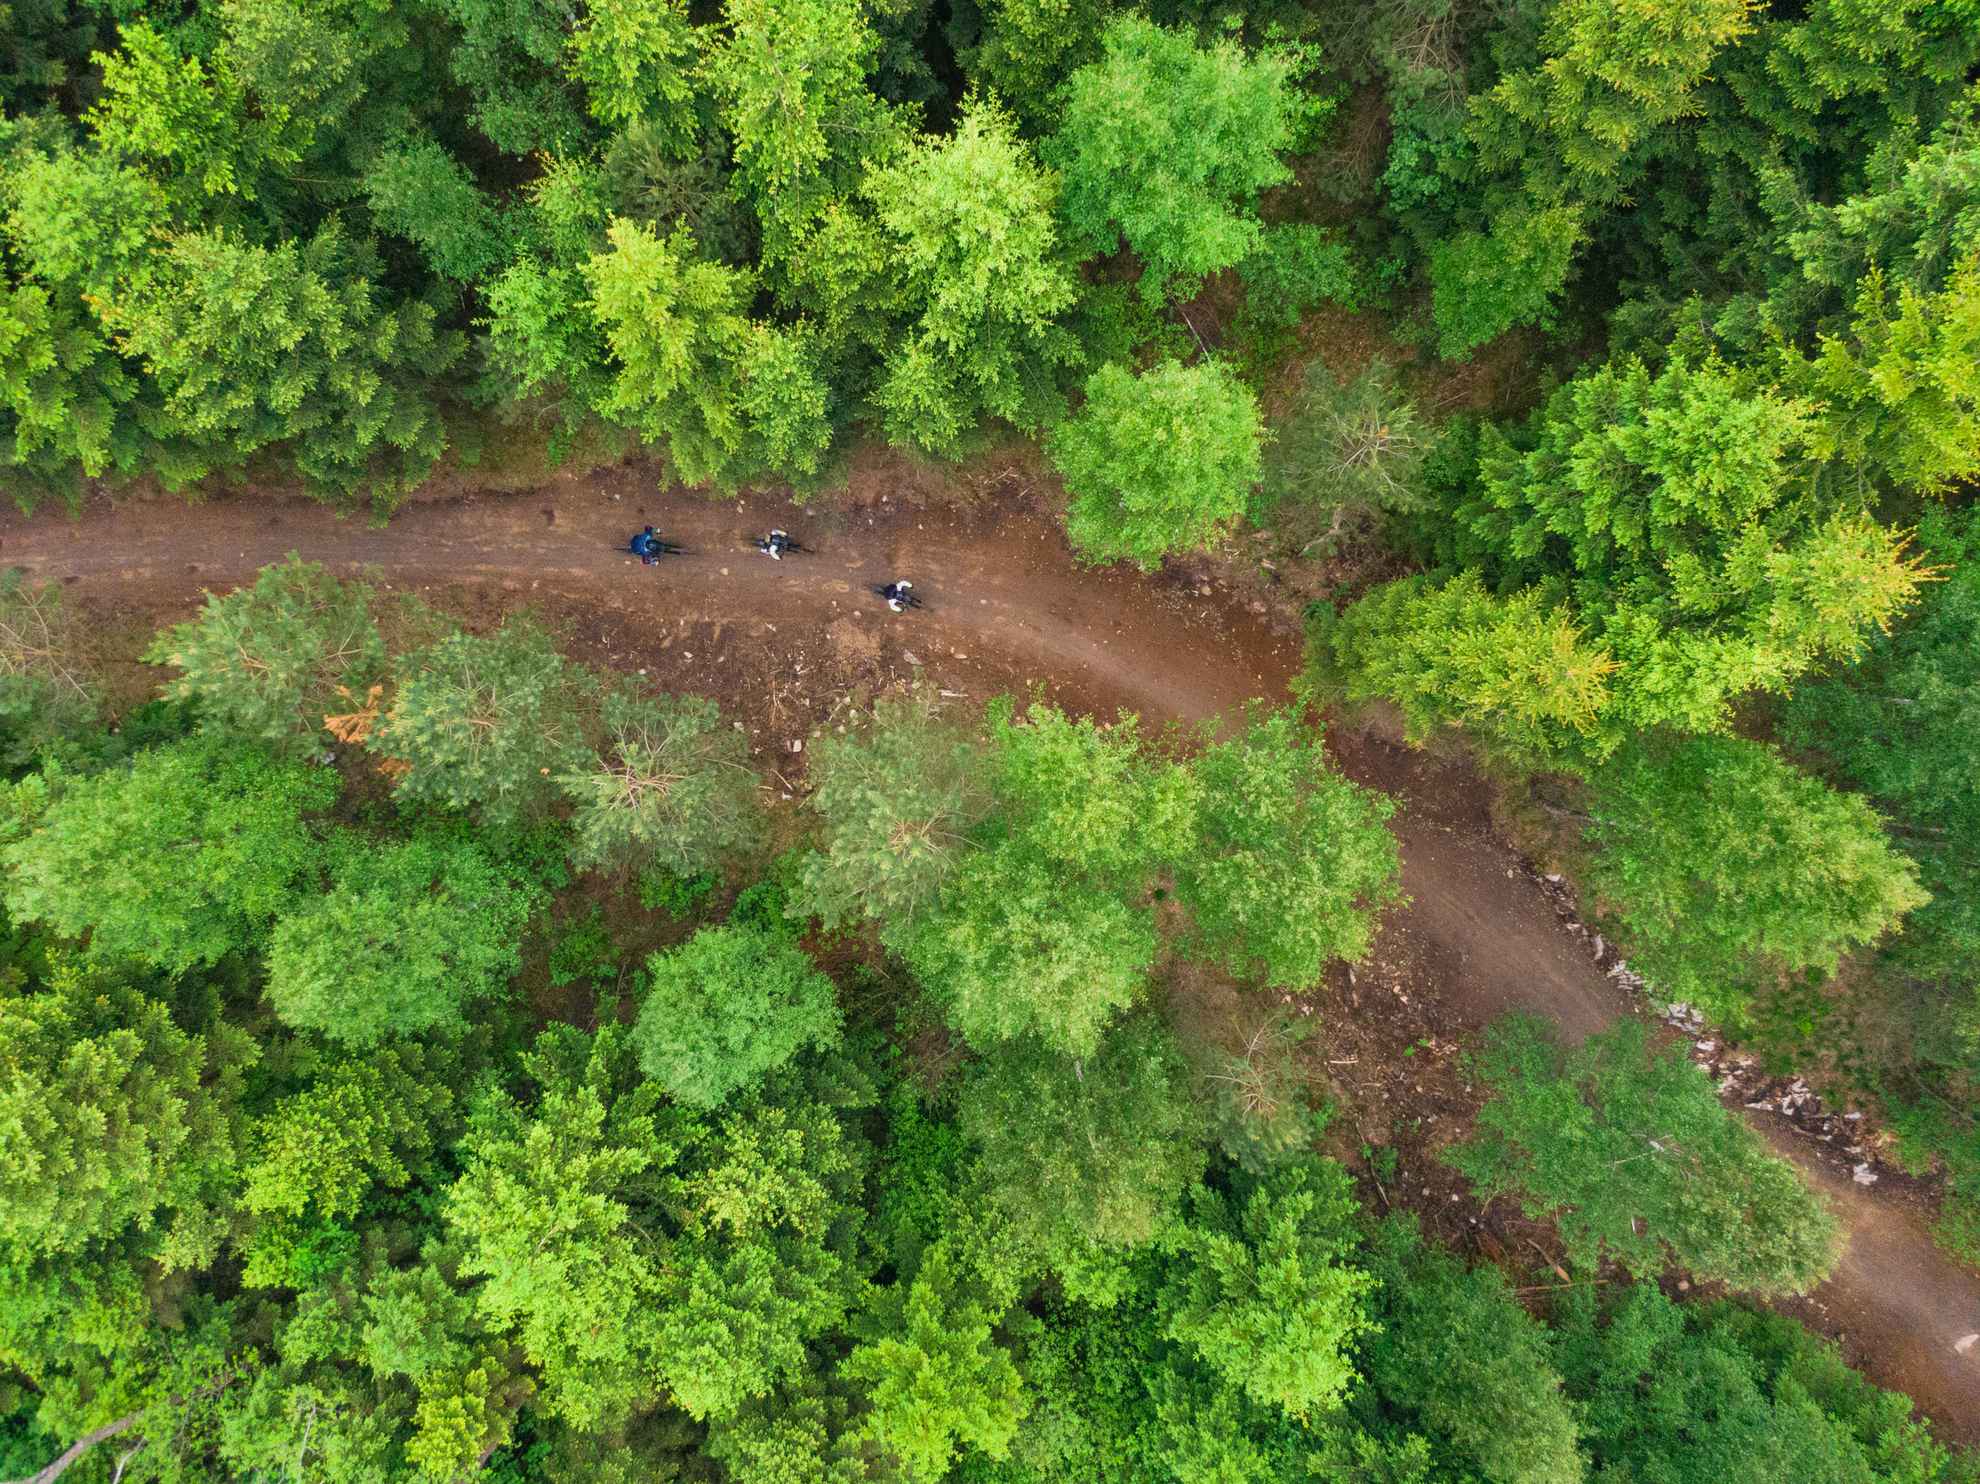 A biking trail winding through the green forest, seen from above.